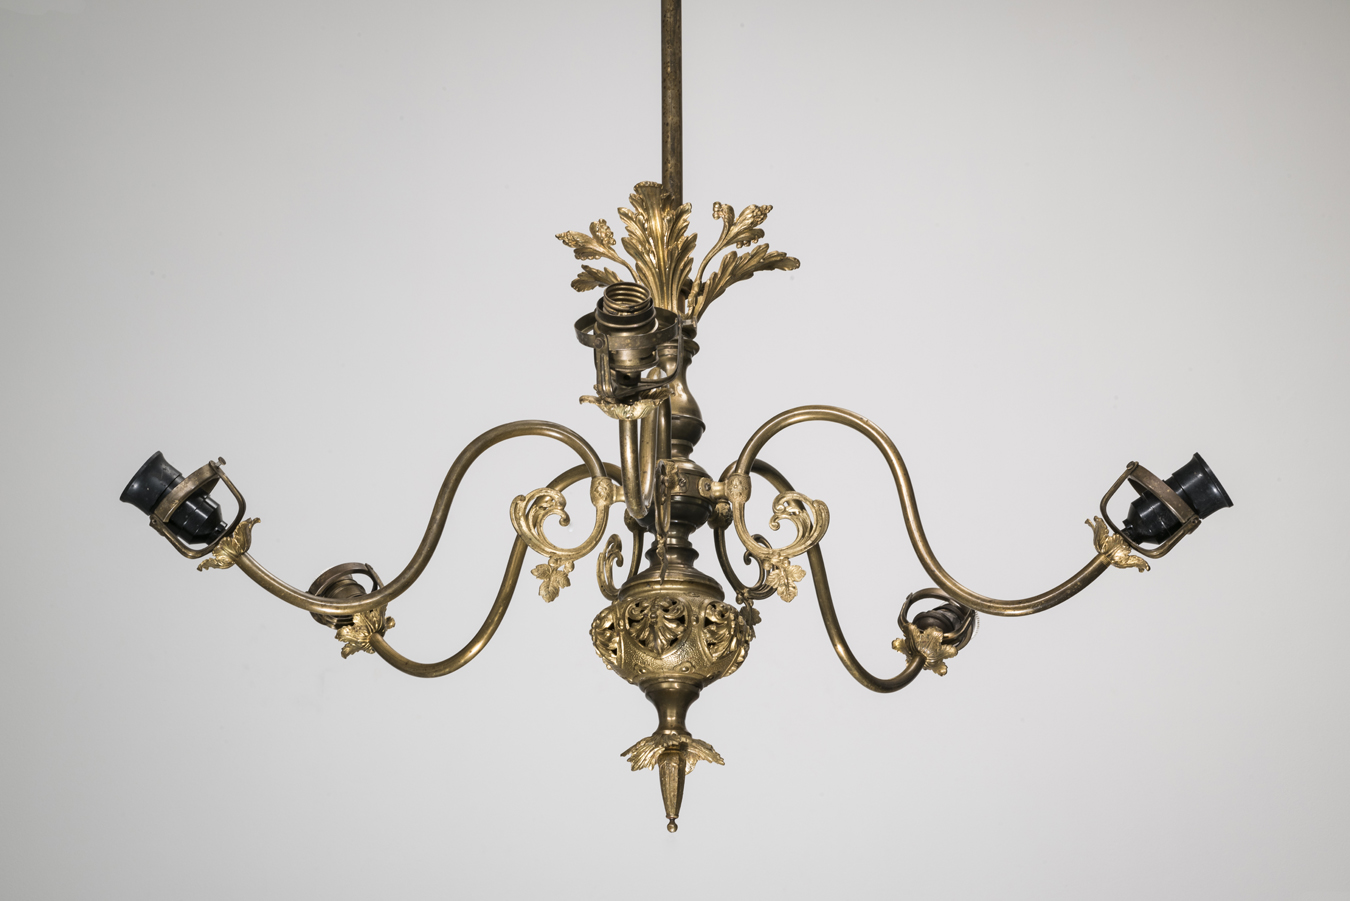 A fragment of the chandelier, the early 20th c., the National Museum of Lithuania, IM-7980. Photo by Kęstutis Stoškus, 2019